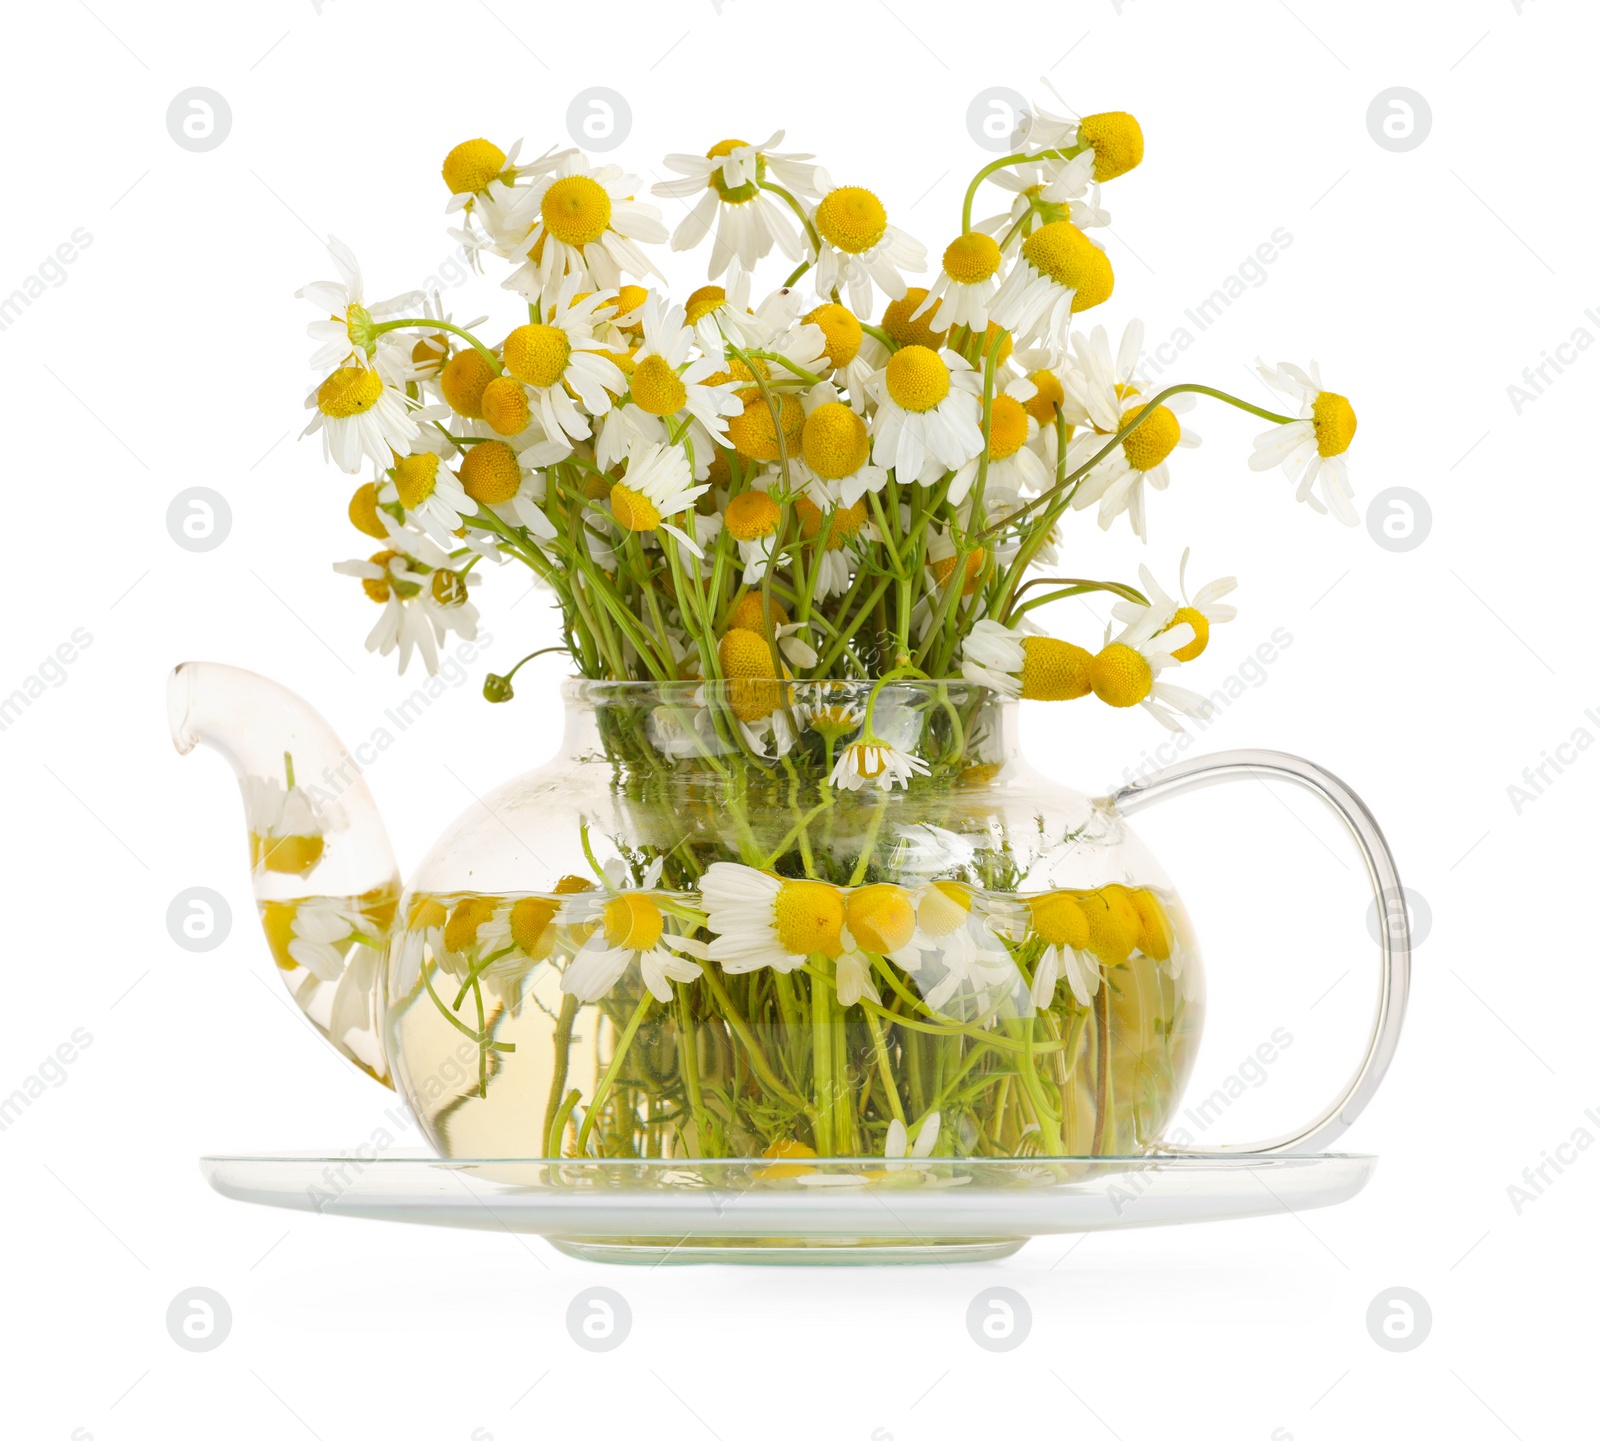 Photo of Aromatic herbal tea in glass teapot with chamomile flowers isolated on white